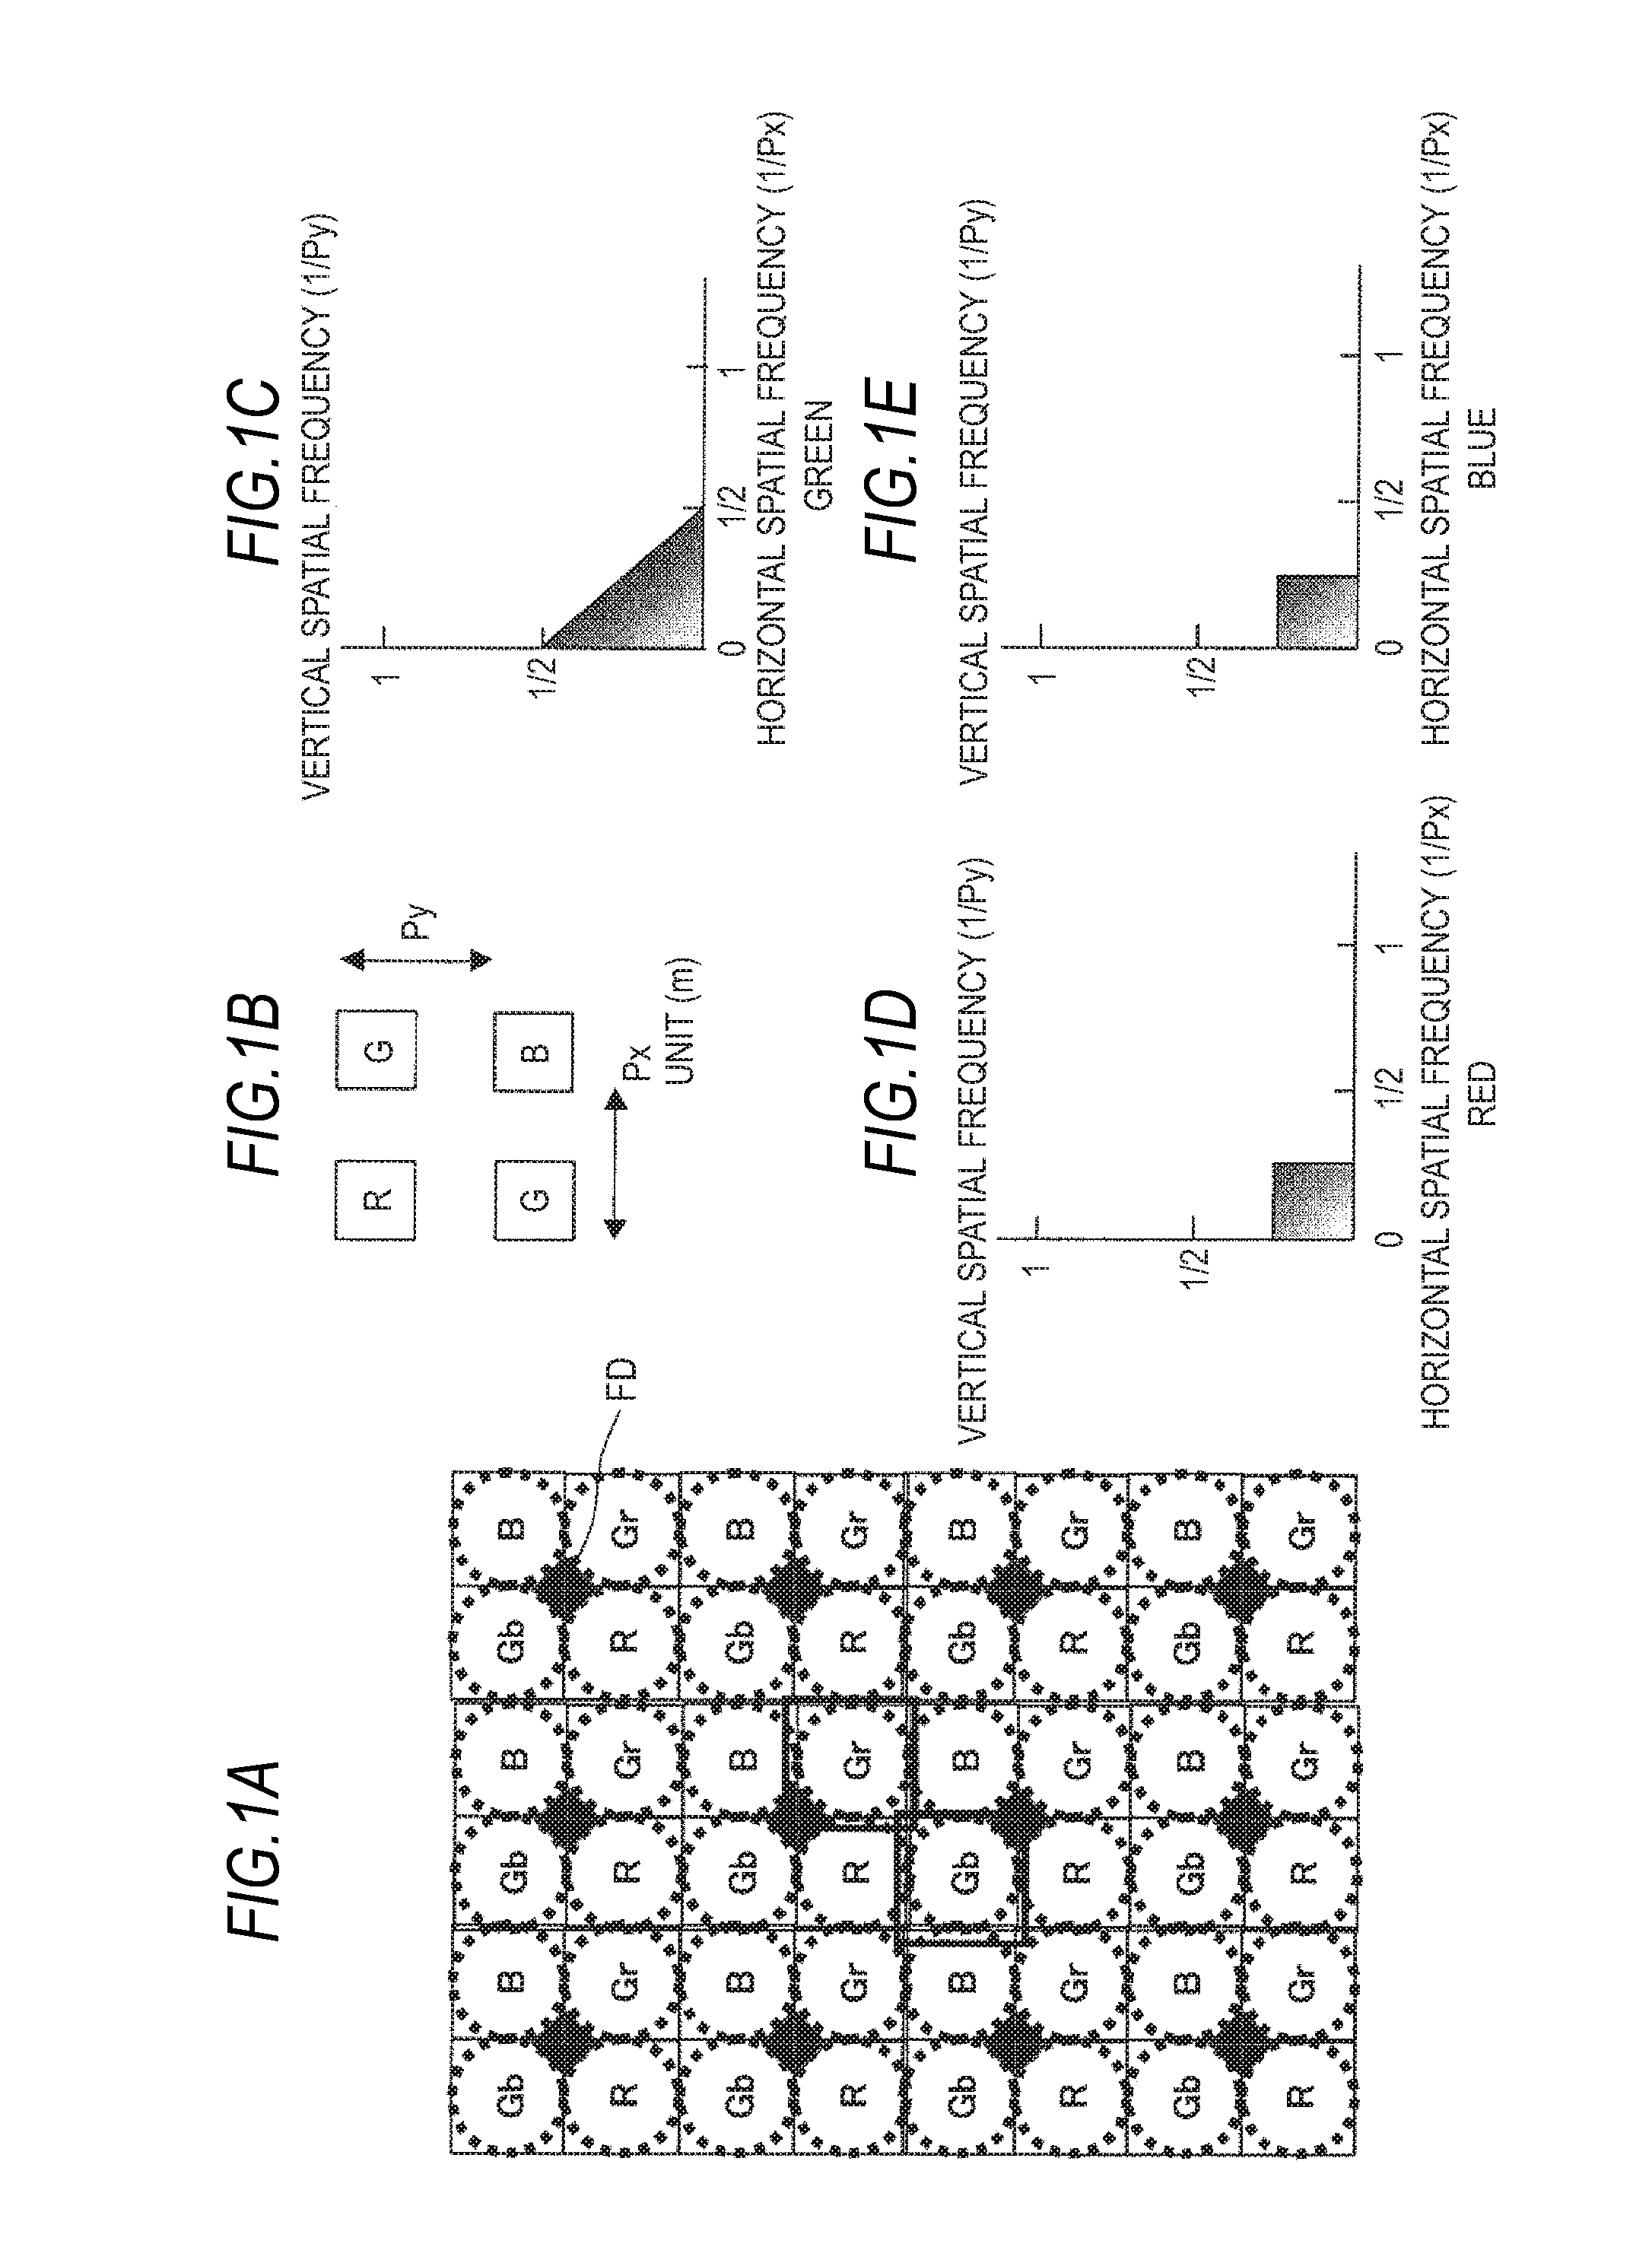 Imaging device, electric charge readout method, and imaging apparatus